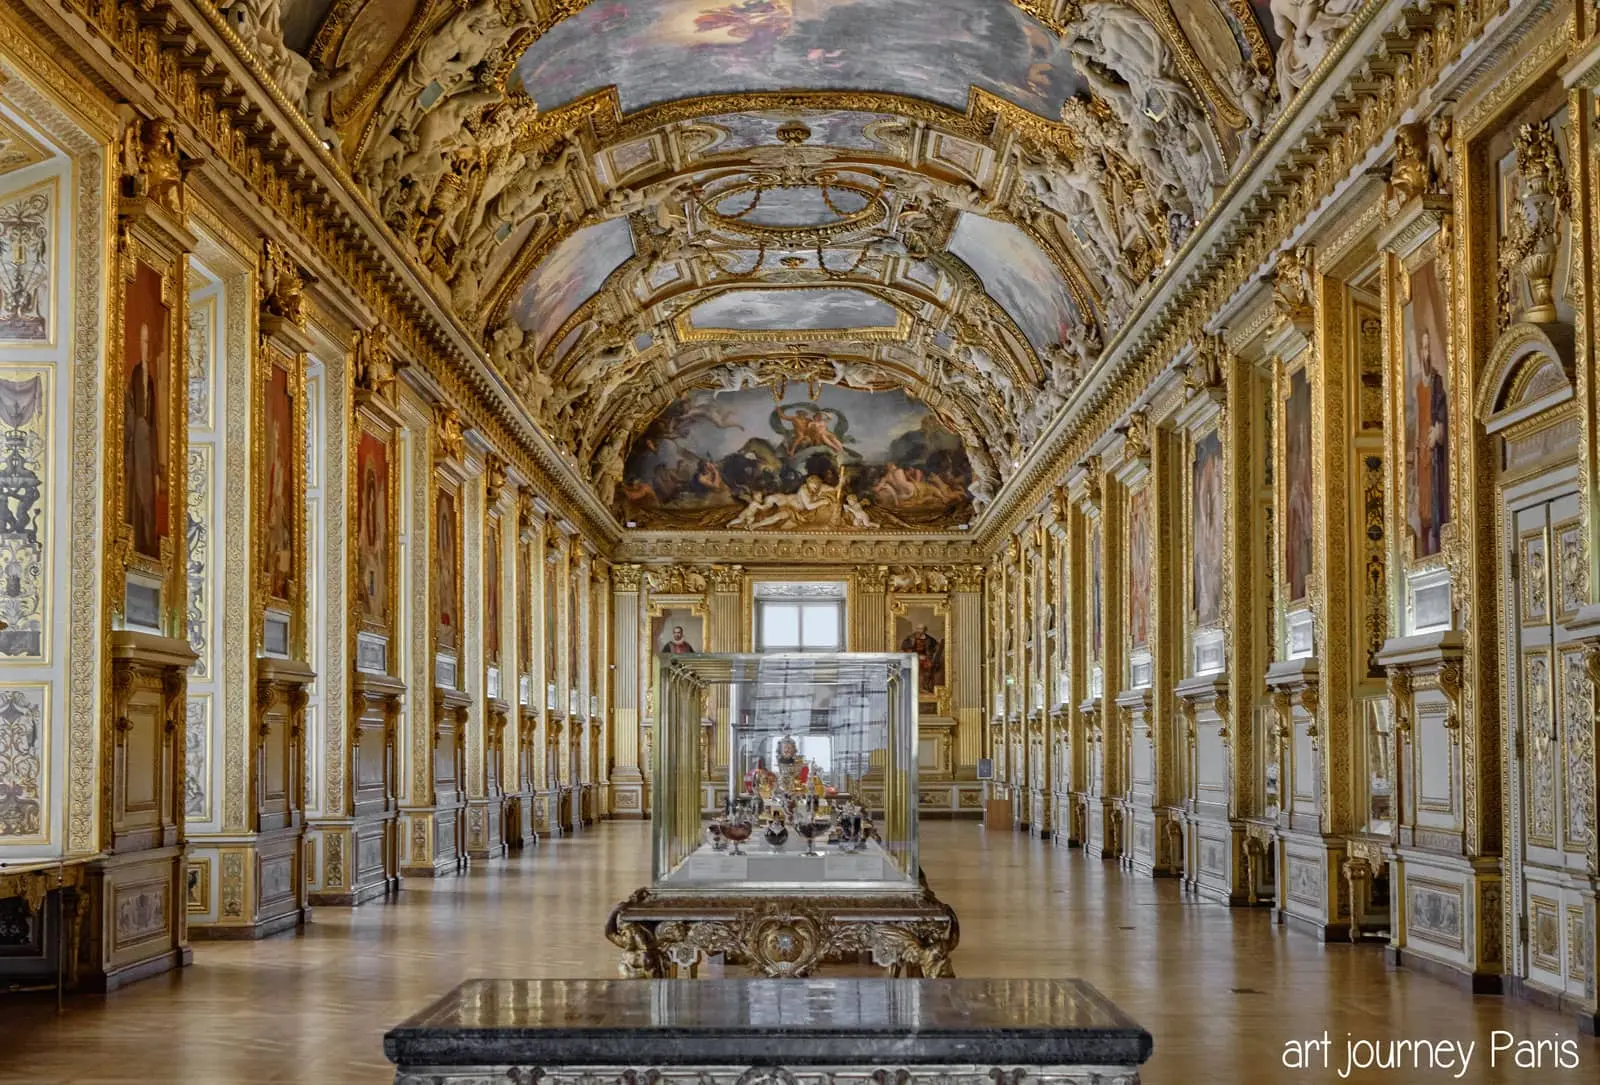 Apollo Gallery Crown Jewels room of the Louvre museum